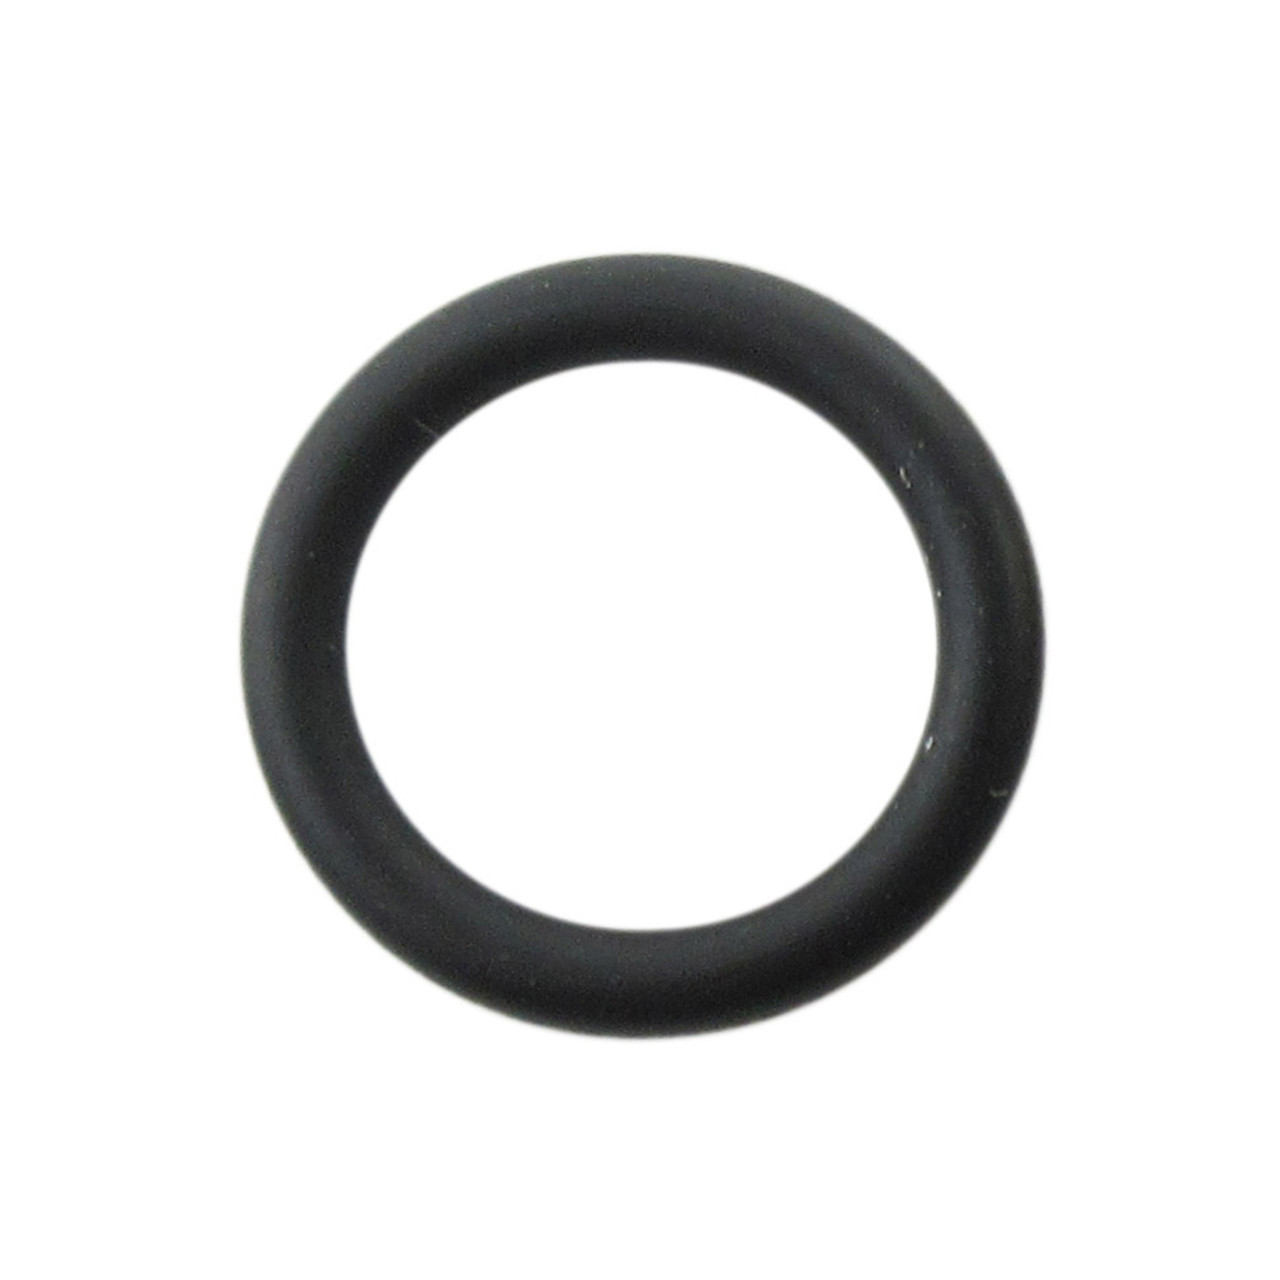 M83248-1-012   FLUOROCARBON FUEL RESISTANT O-RING